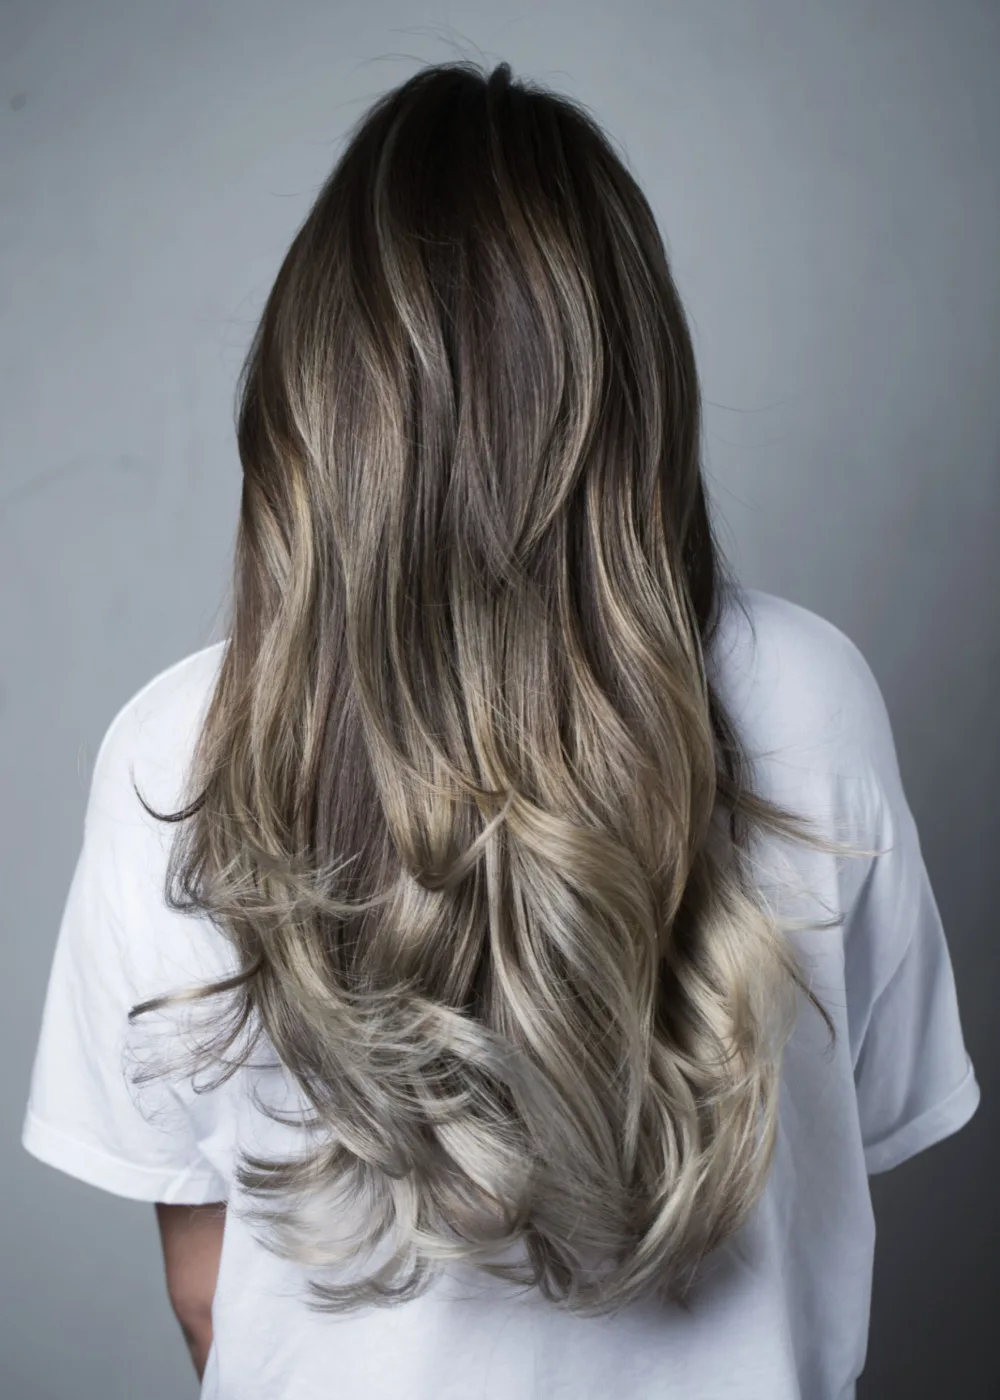 Silvery Ash Blonde and Brown Balayage for a piece on cool tone hair colors